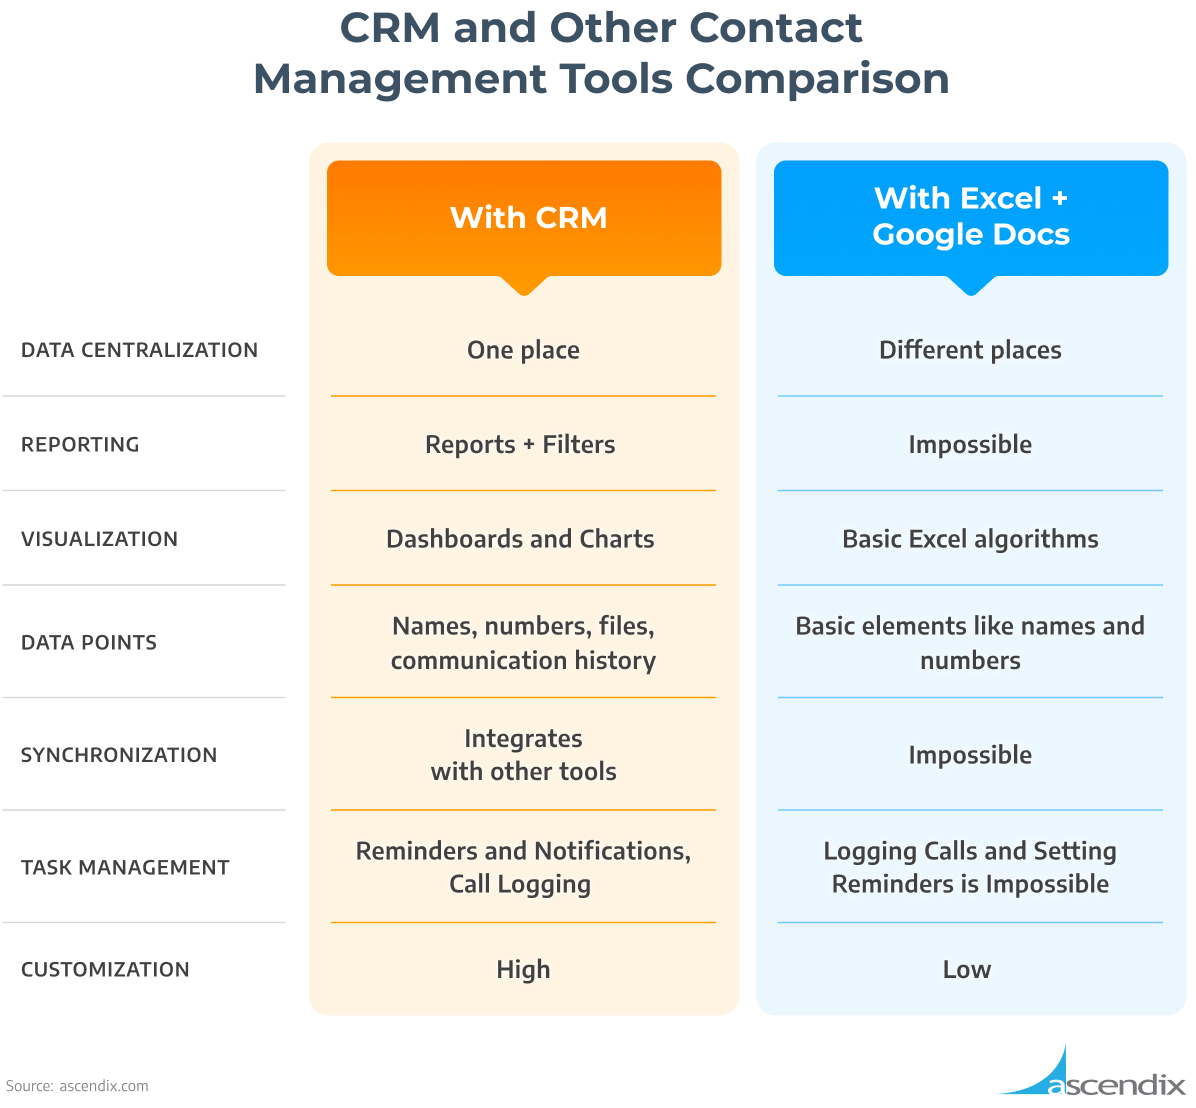 CRM and Other Contact Management Tools Comparison 01